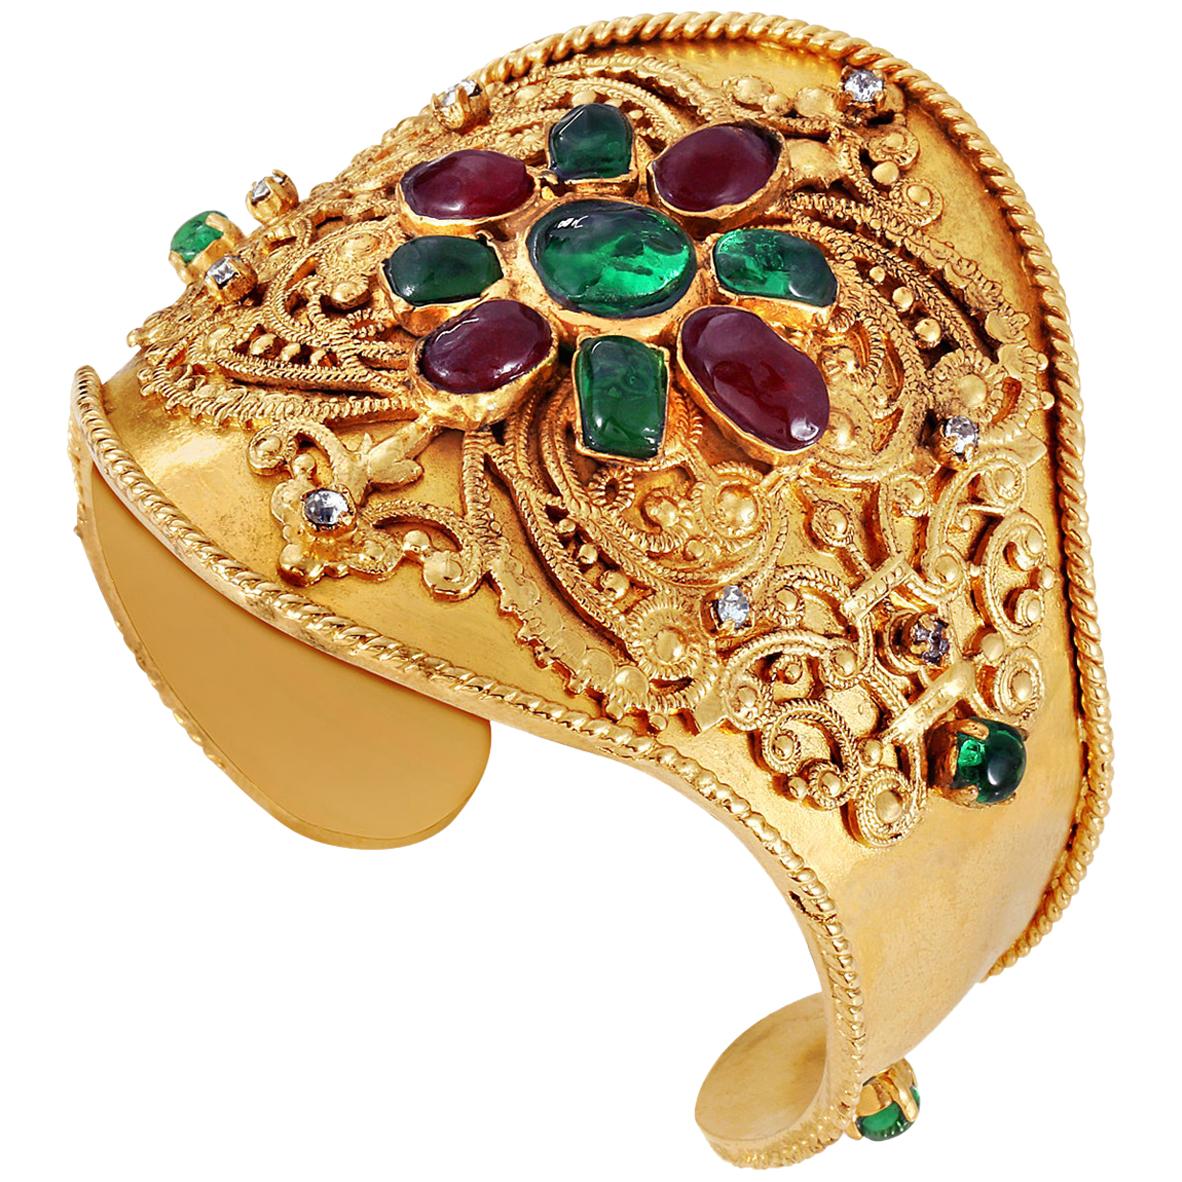 Chanel Red and Green Gripoix Gold Ornate Cuff